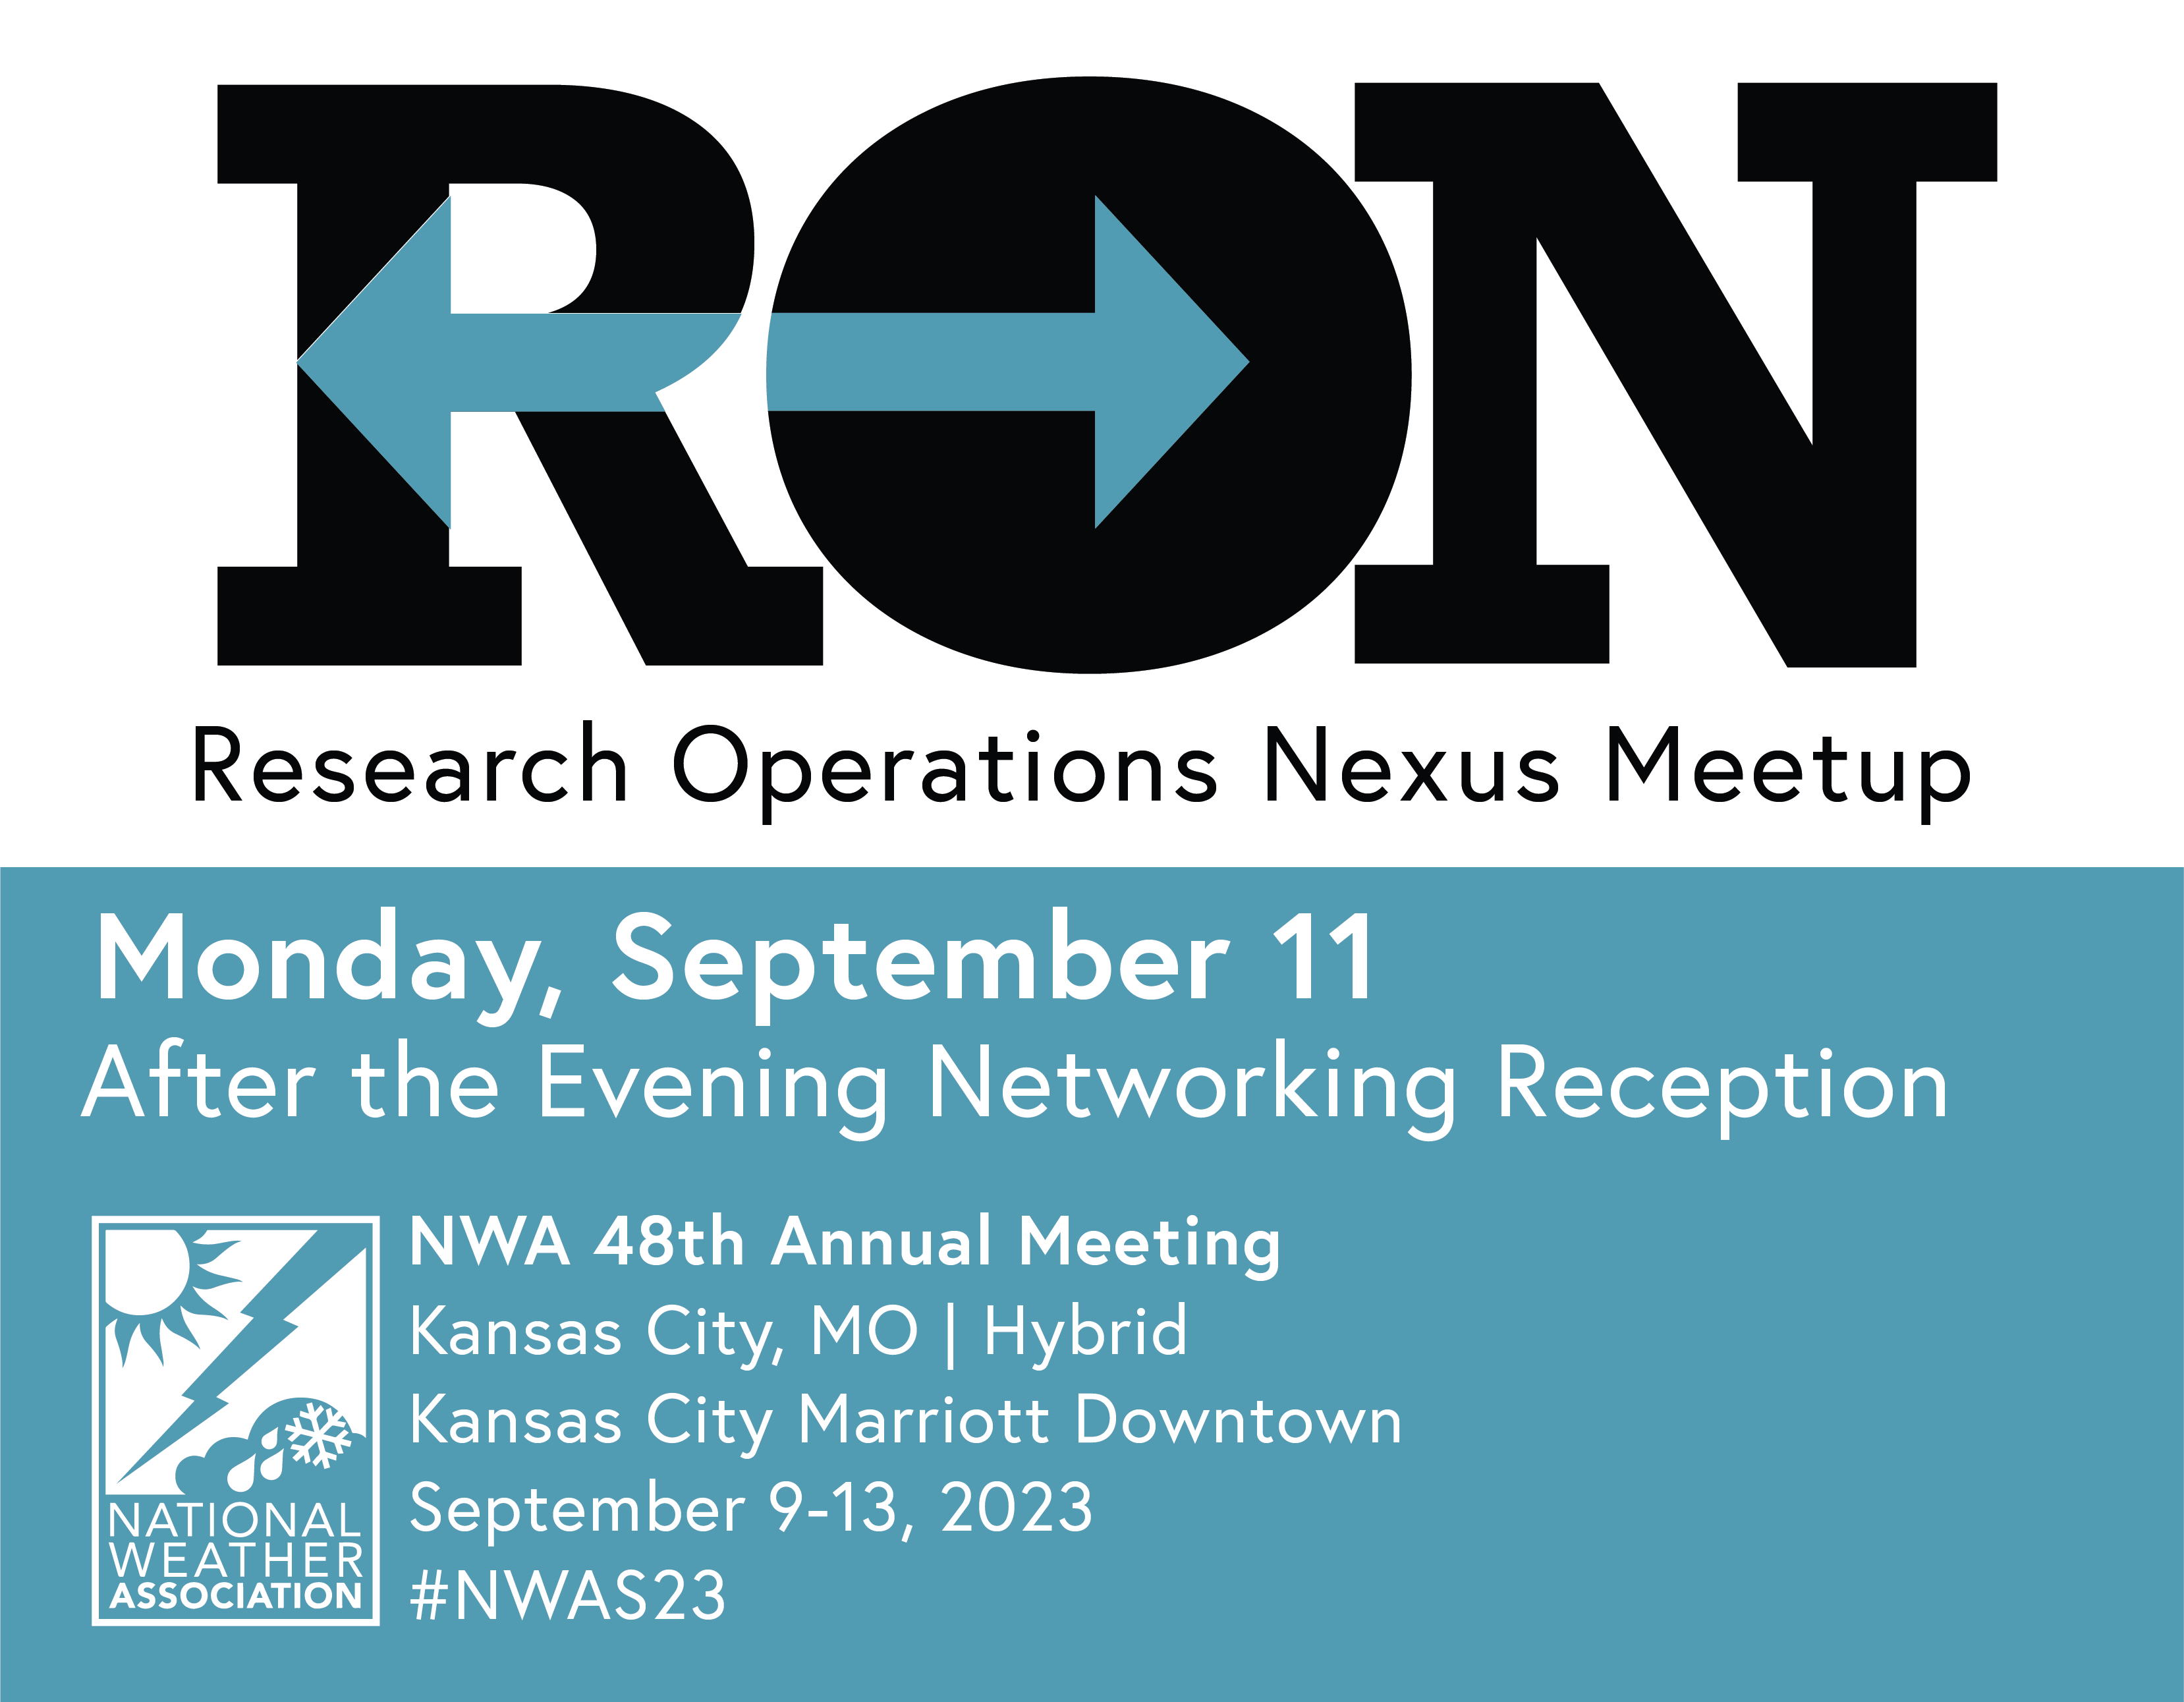 the research operations nexus meetup will take place Monday, september 22 After the Evening Networking Reception. 